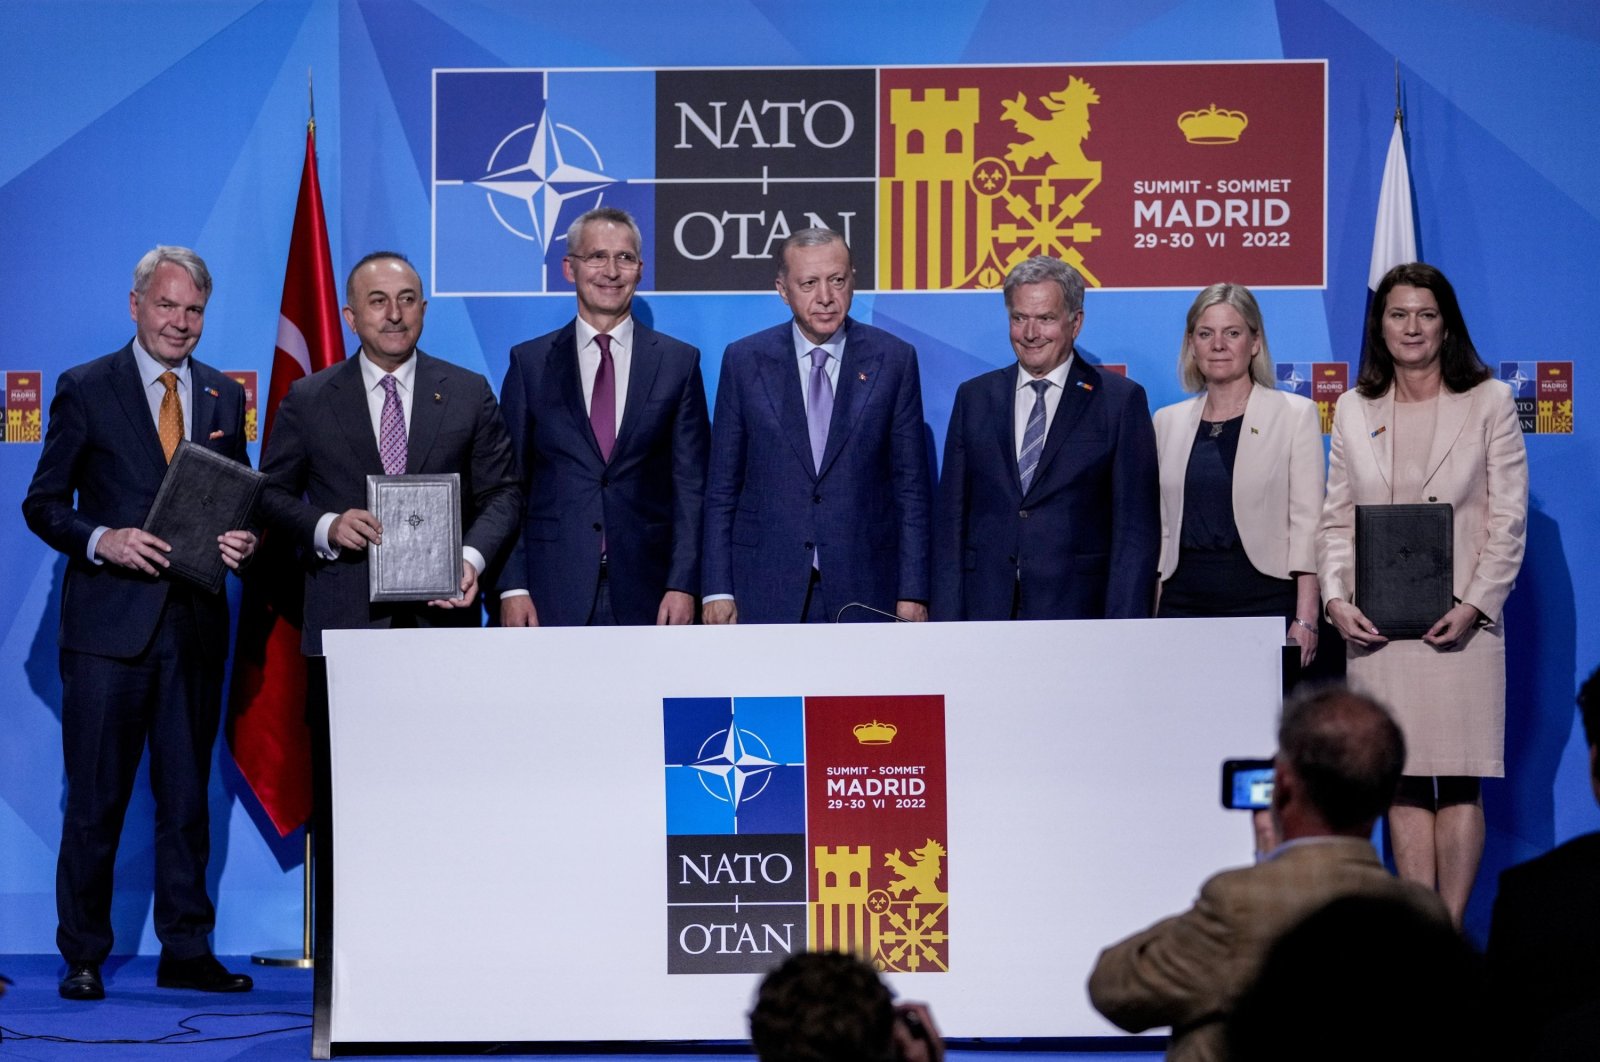 From left to right, Finnish Foreign Minister Pekka Haavisto, Foreign Minister Mevlüt Çavuşoğlu, NATO Secretary-General Jens Stoltenberg, President Recep Tayyip Erdoğan, Finland&#039;s President Sauli Niinisto, Sweden&#039;s Prime Minister Magdalena Andersson and Swedish Foreign Minister Ann Linde pose for a picture after signing a memorandum in which Türkiye agrees to Finland and Sweden&#039;s NATO membership, Madrid, Spain, June 28, 2022. (AP Photo)